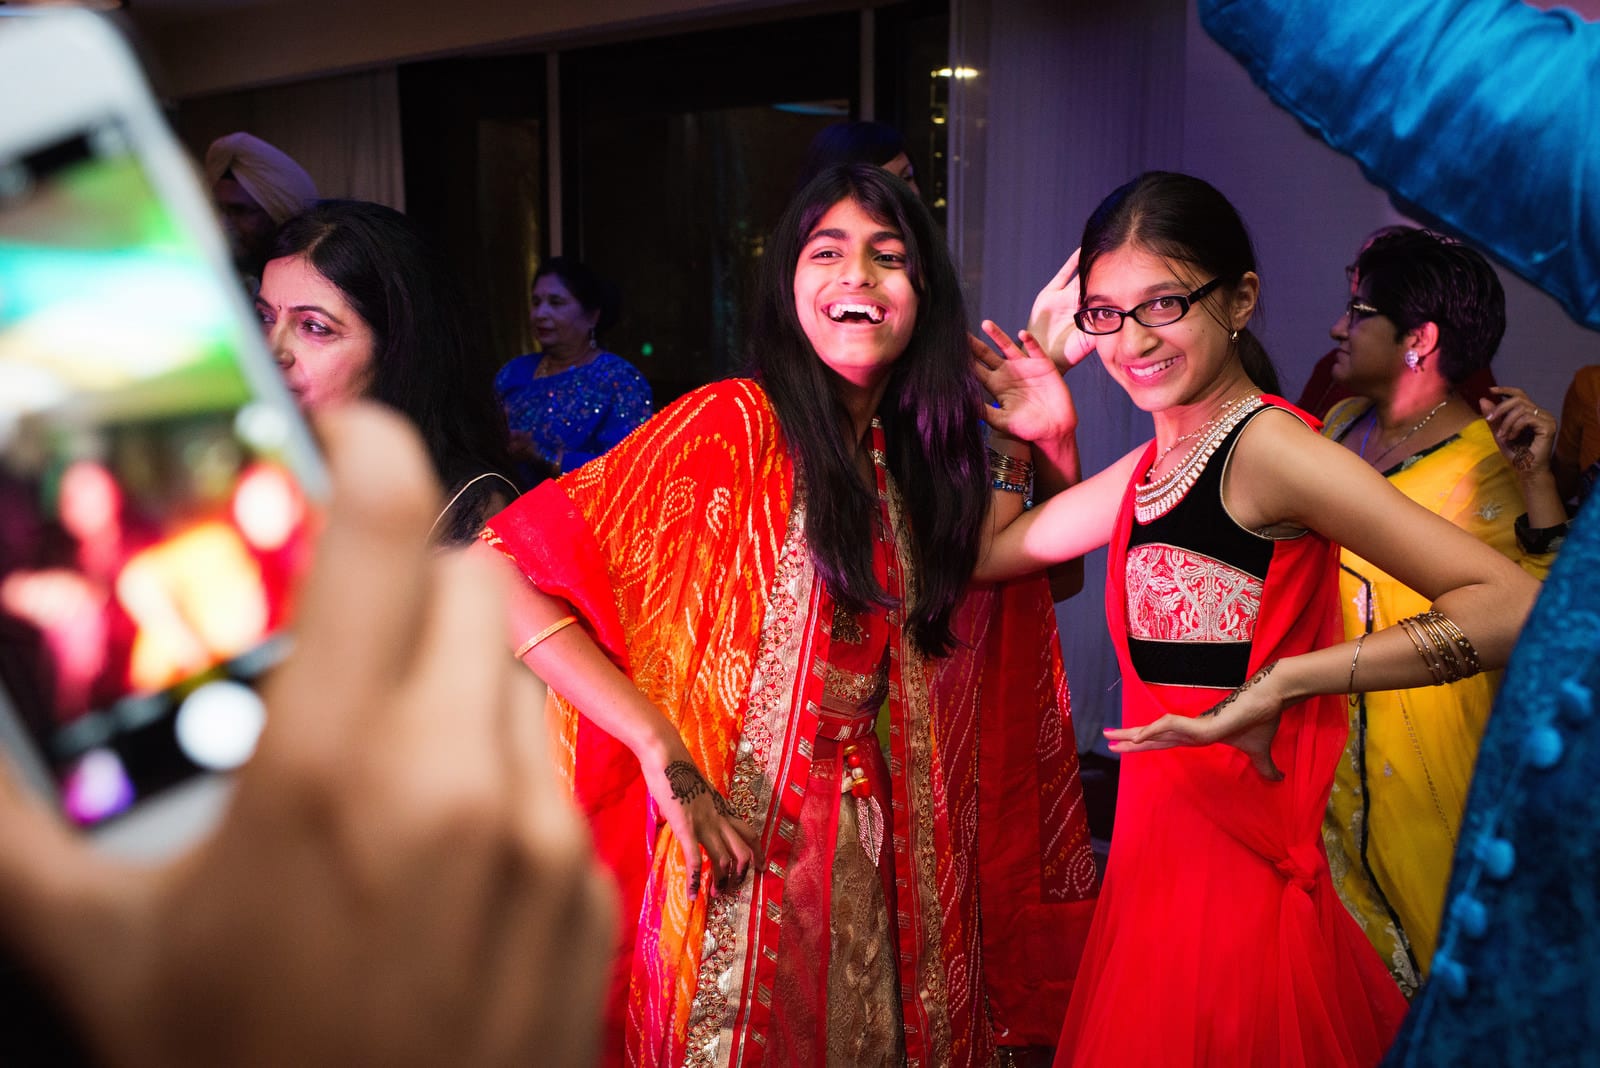 Two girls wearing bright colored clothing dance together as they are seen through the lens of a cell phone camera during a Renaissance Phipps South Asian Wedding.